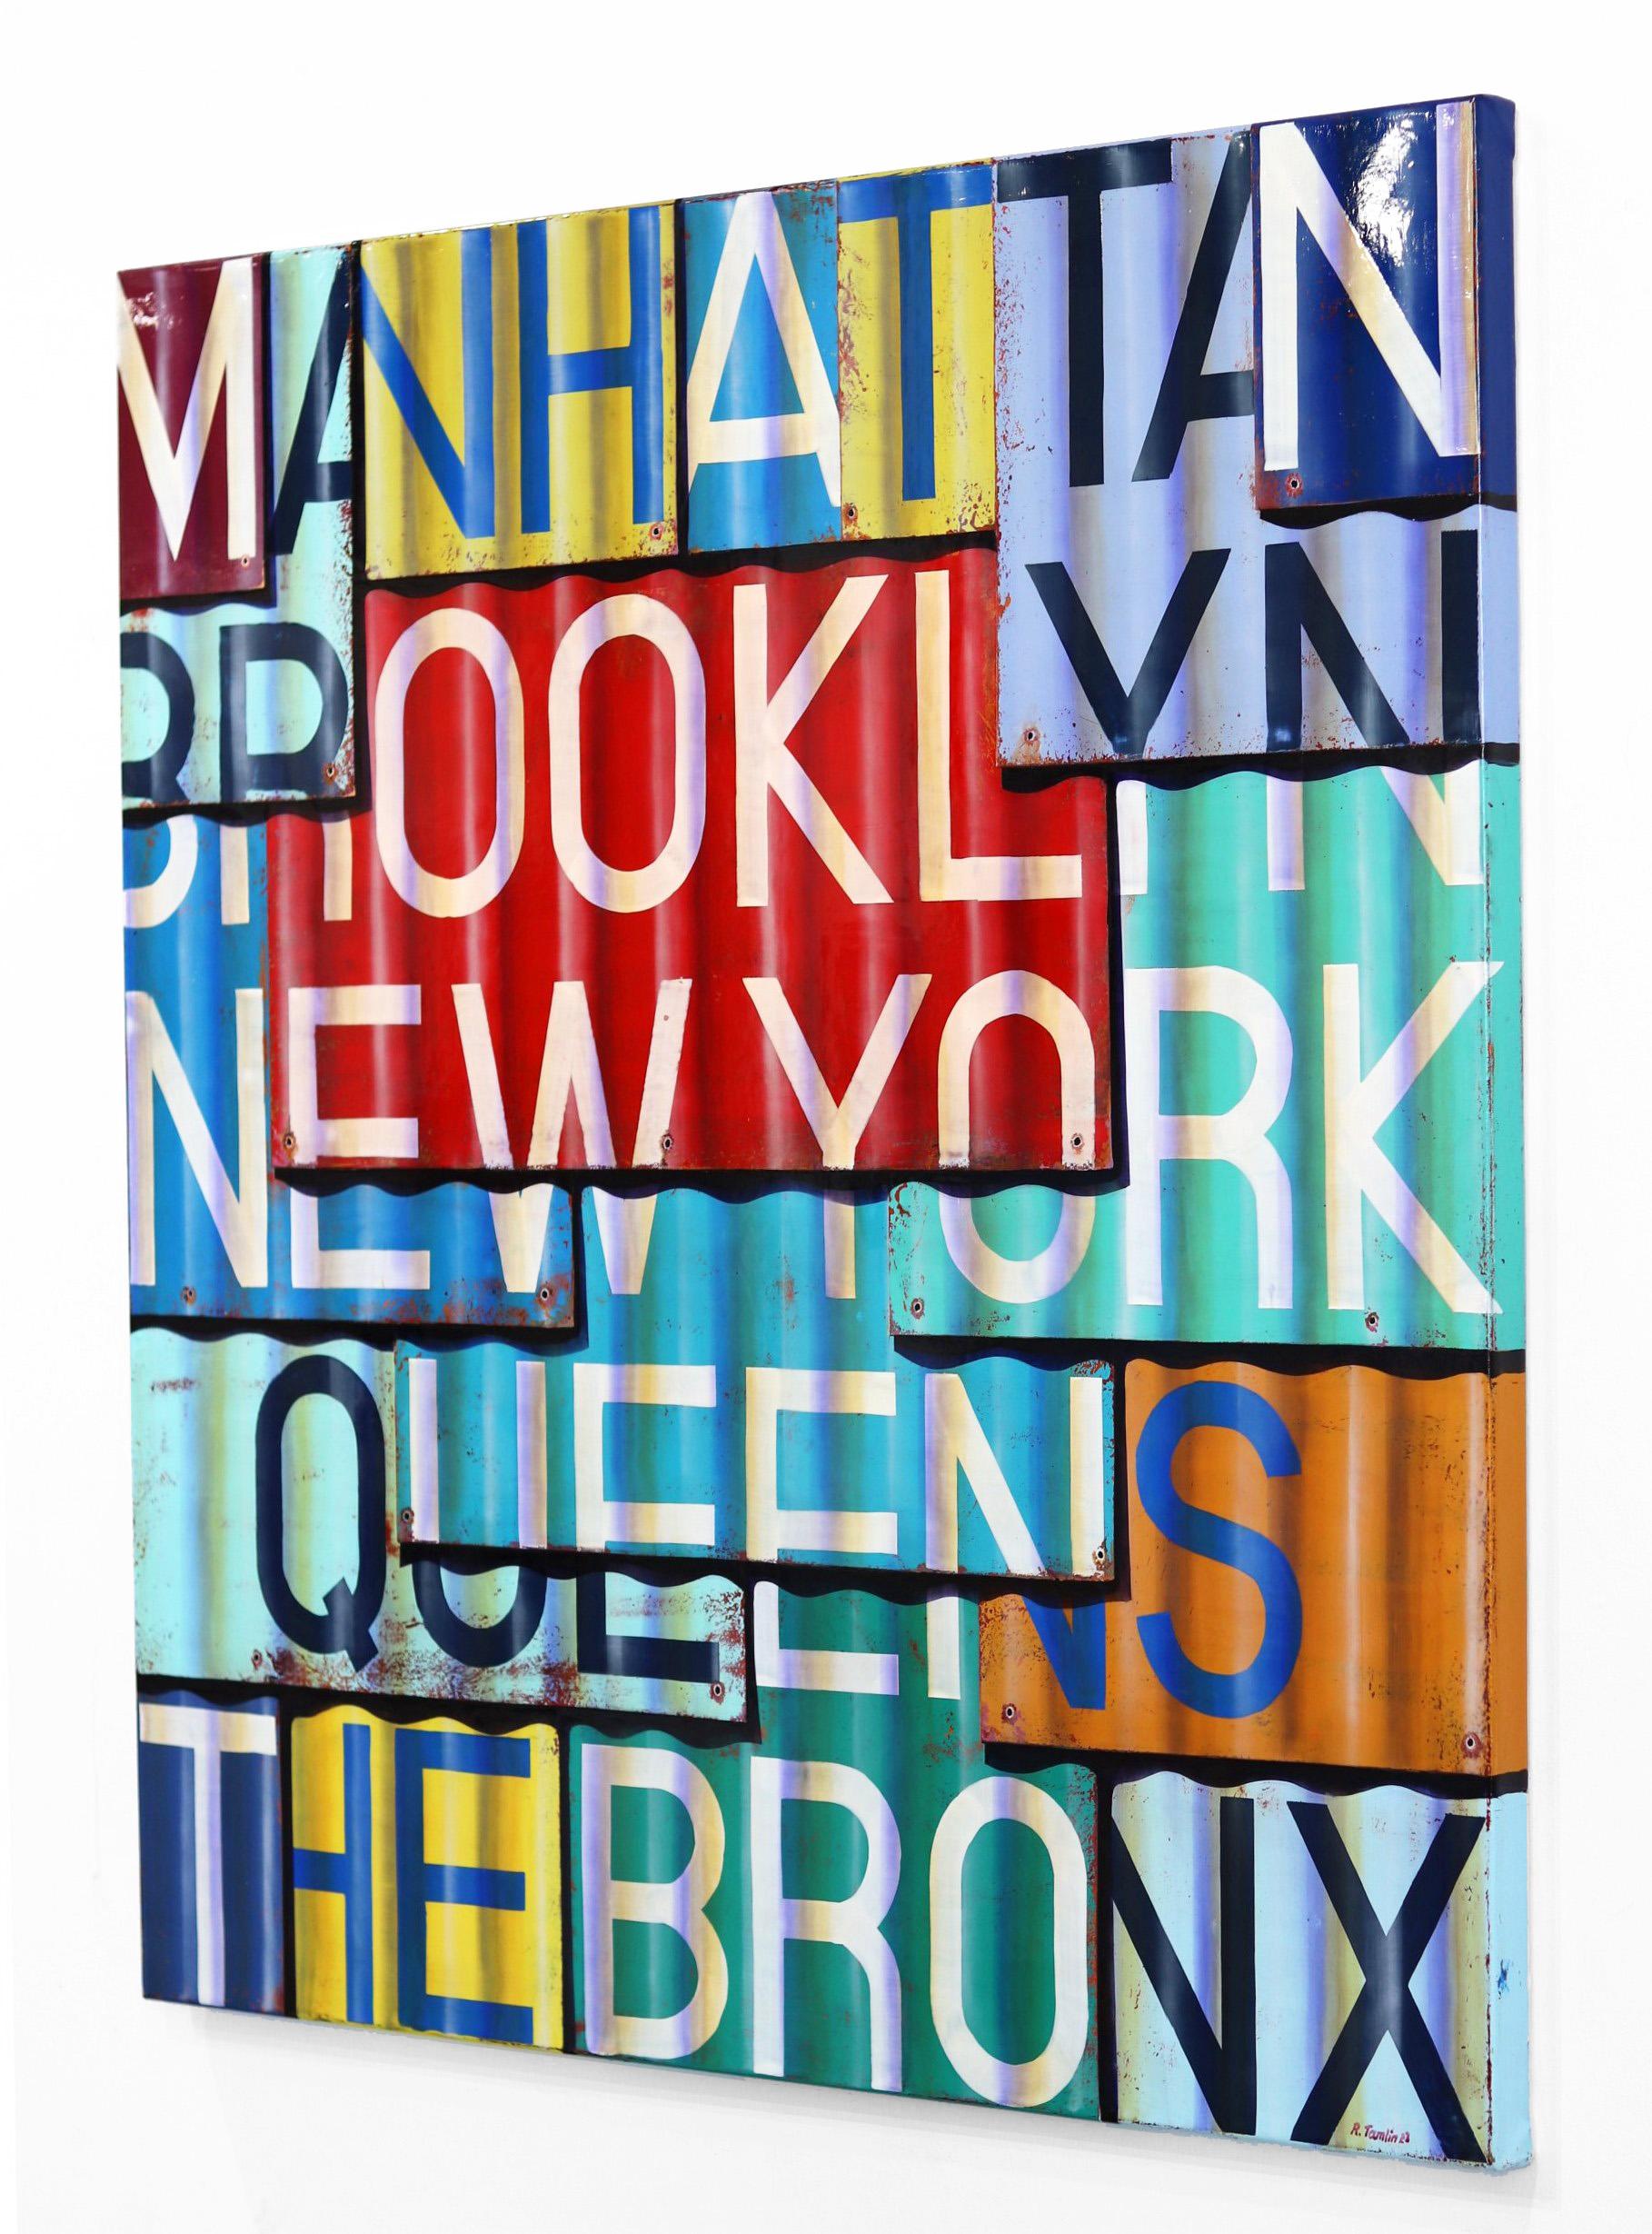 New York - Photorealistic Sign Painting with Oil and Enamel on Canvas For Sale 2